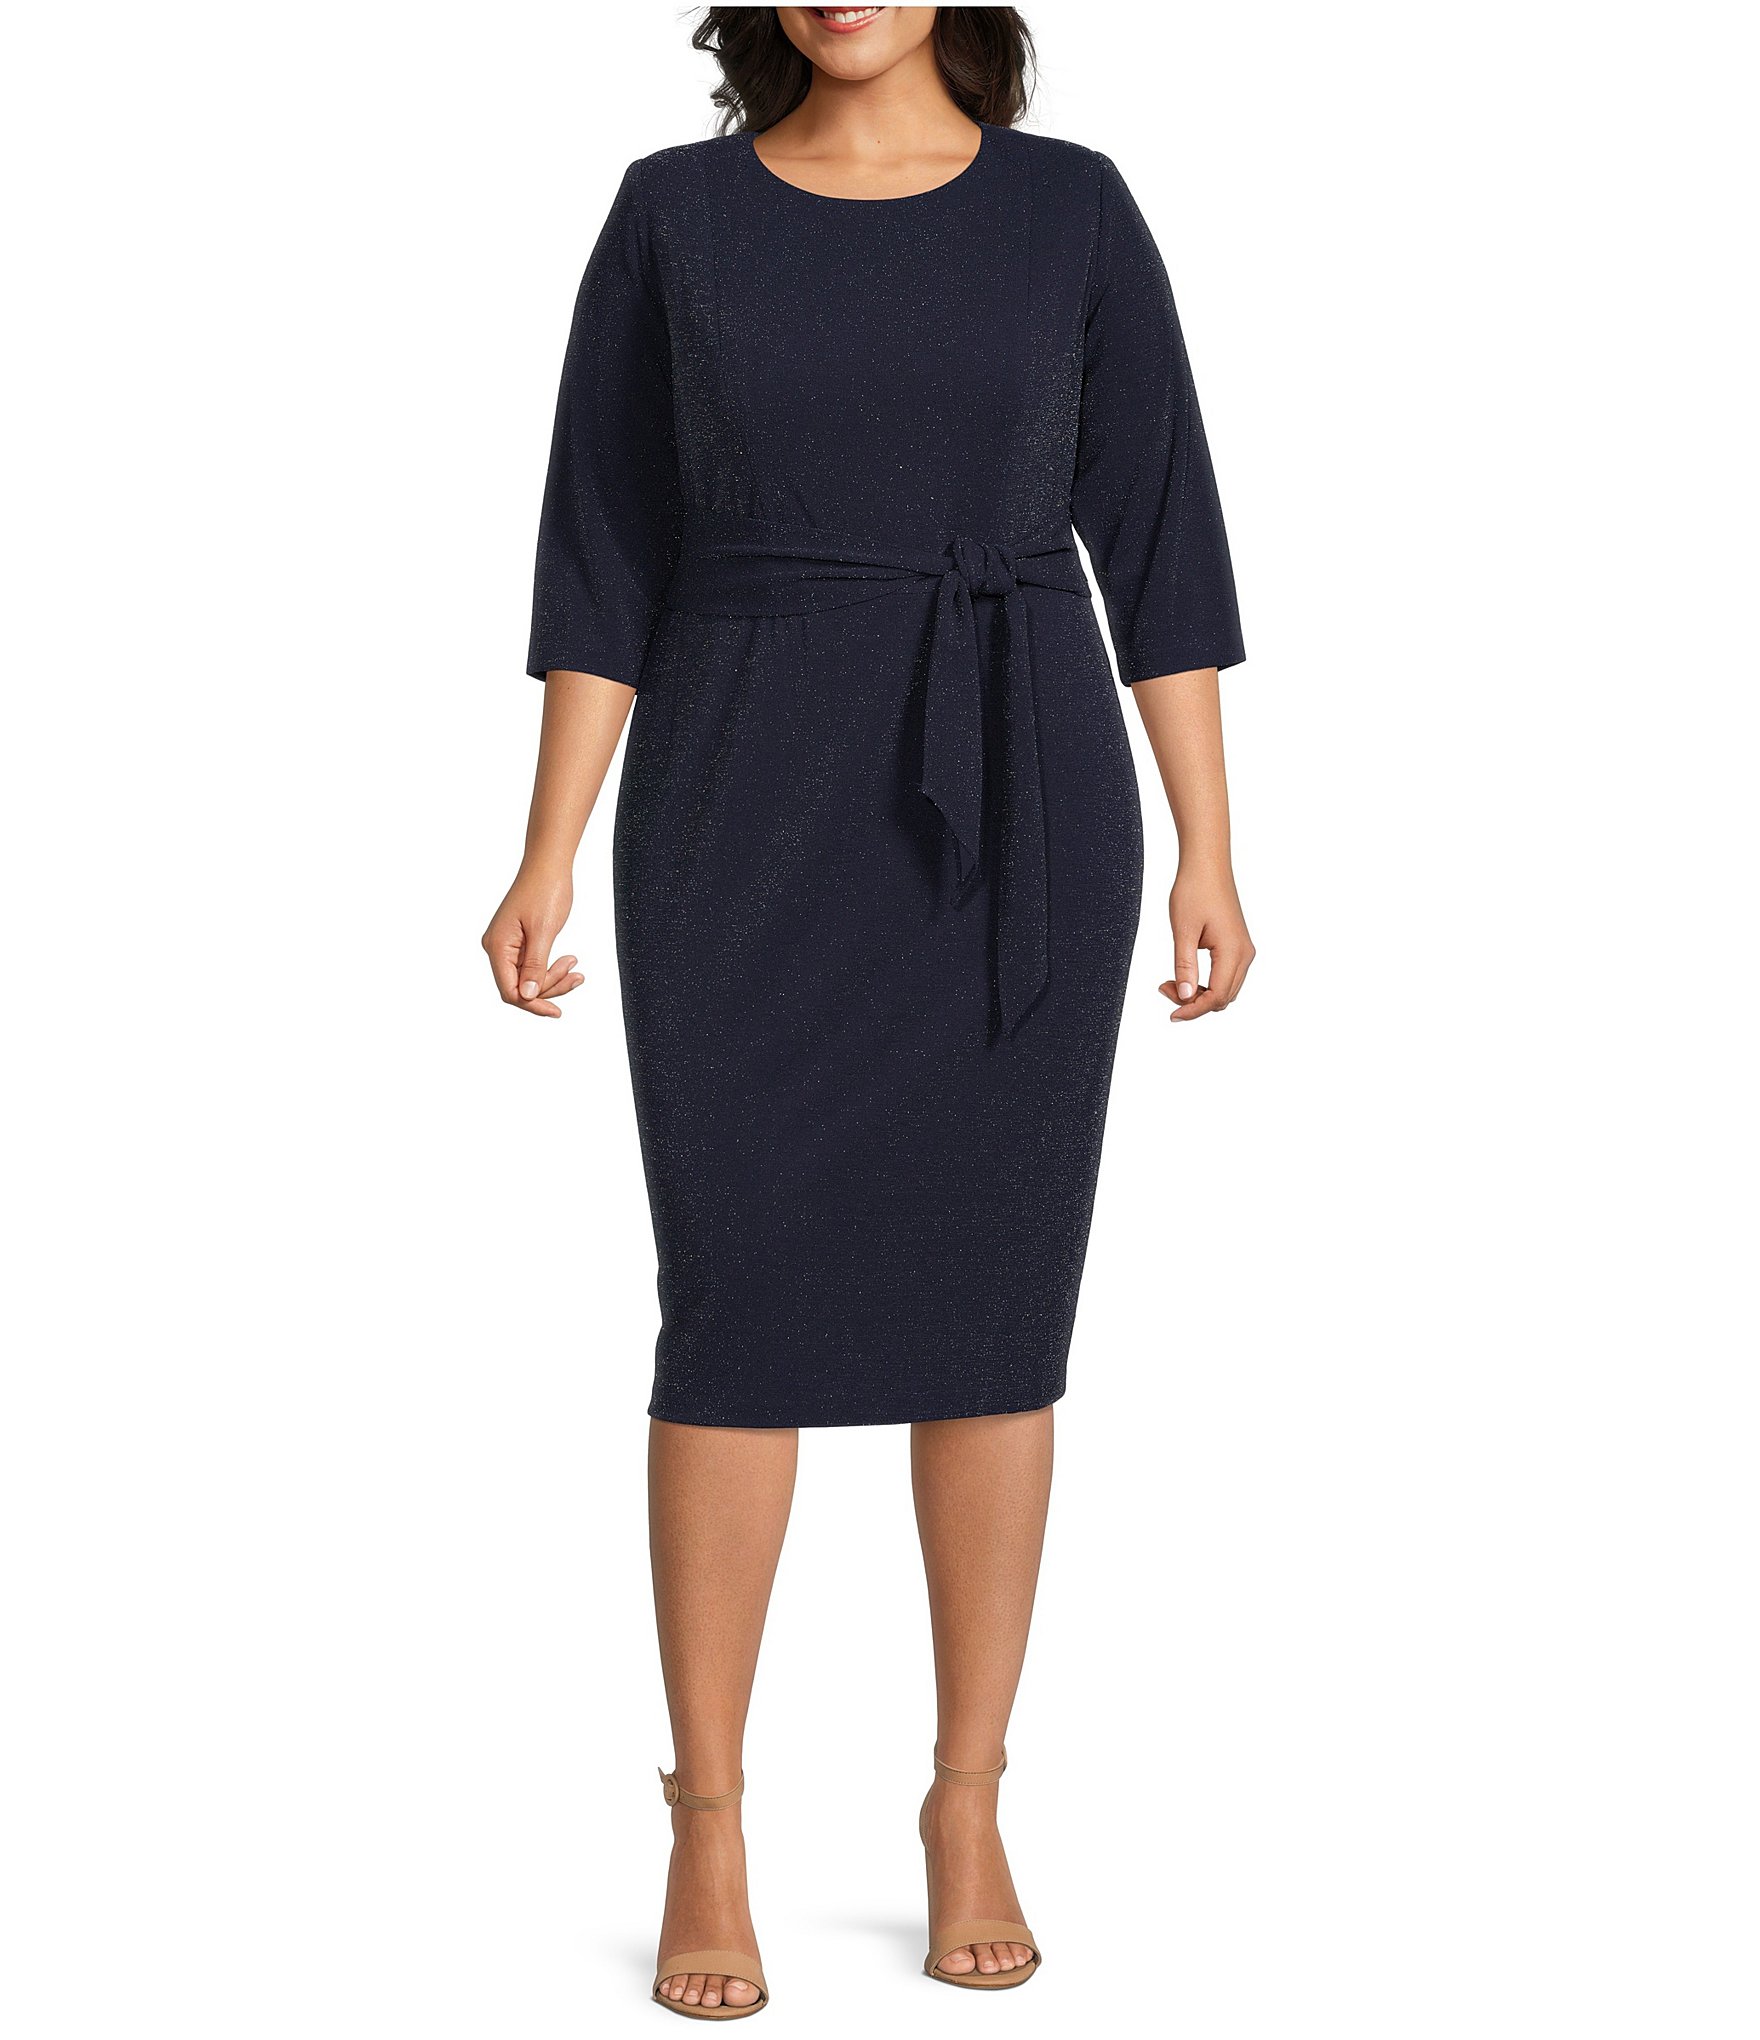 Adrianna Papell Plus Size Stretch Crepe 3/4 Bell Sleeve Sheath Dress